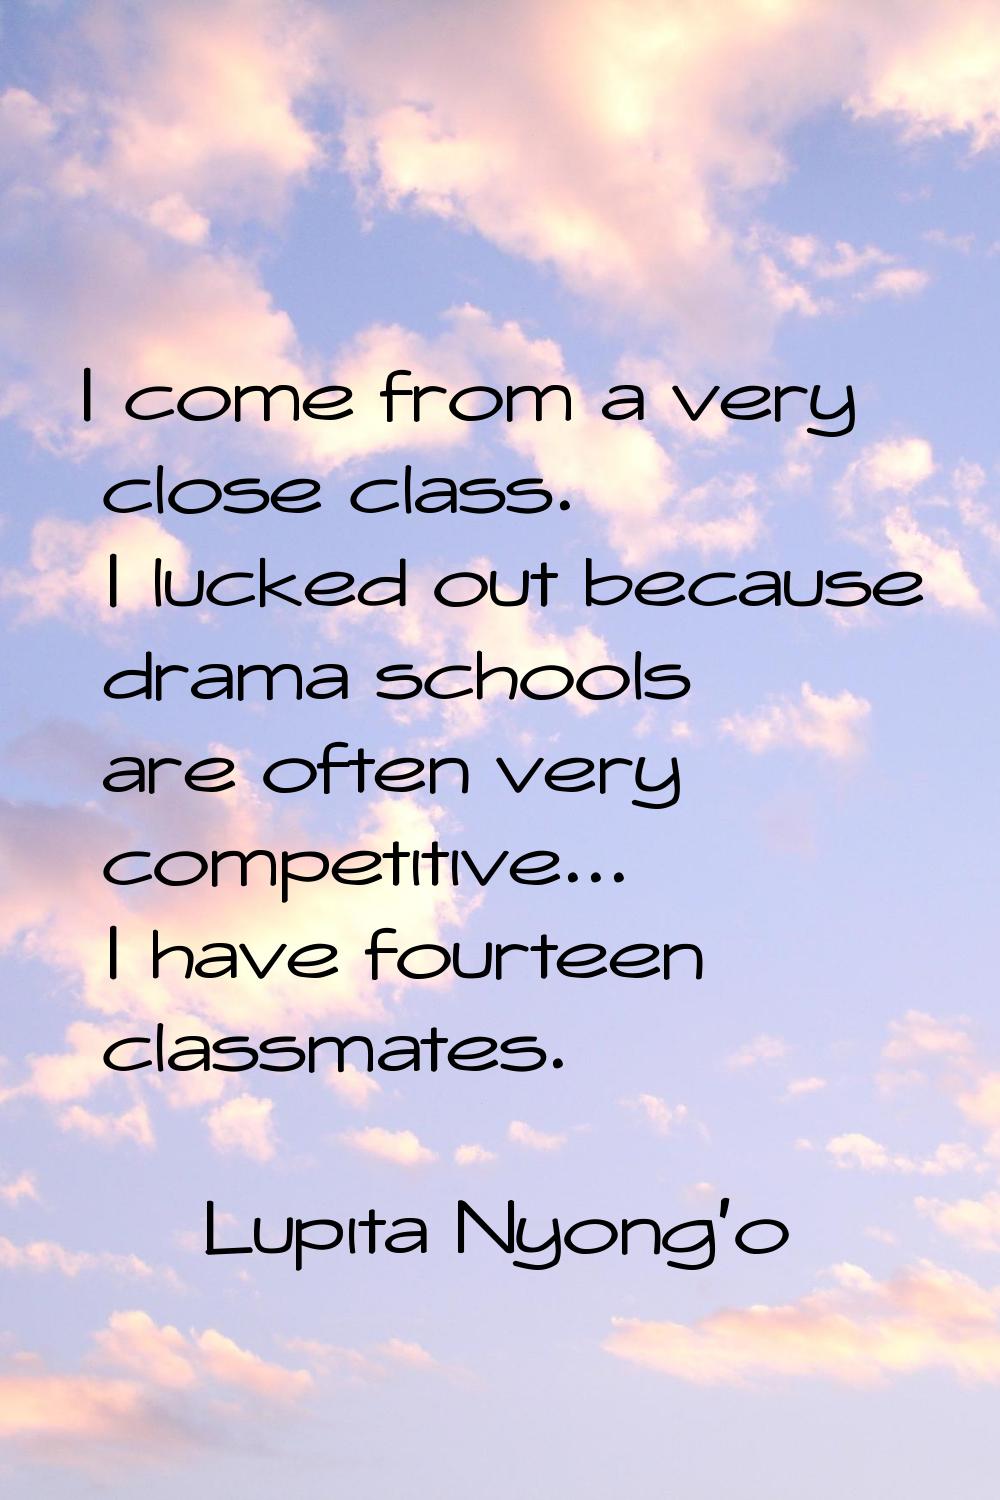 I come from a very close class. I lucked out because drama schools are often very competitive... I 